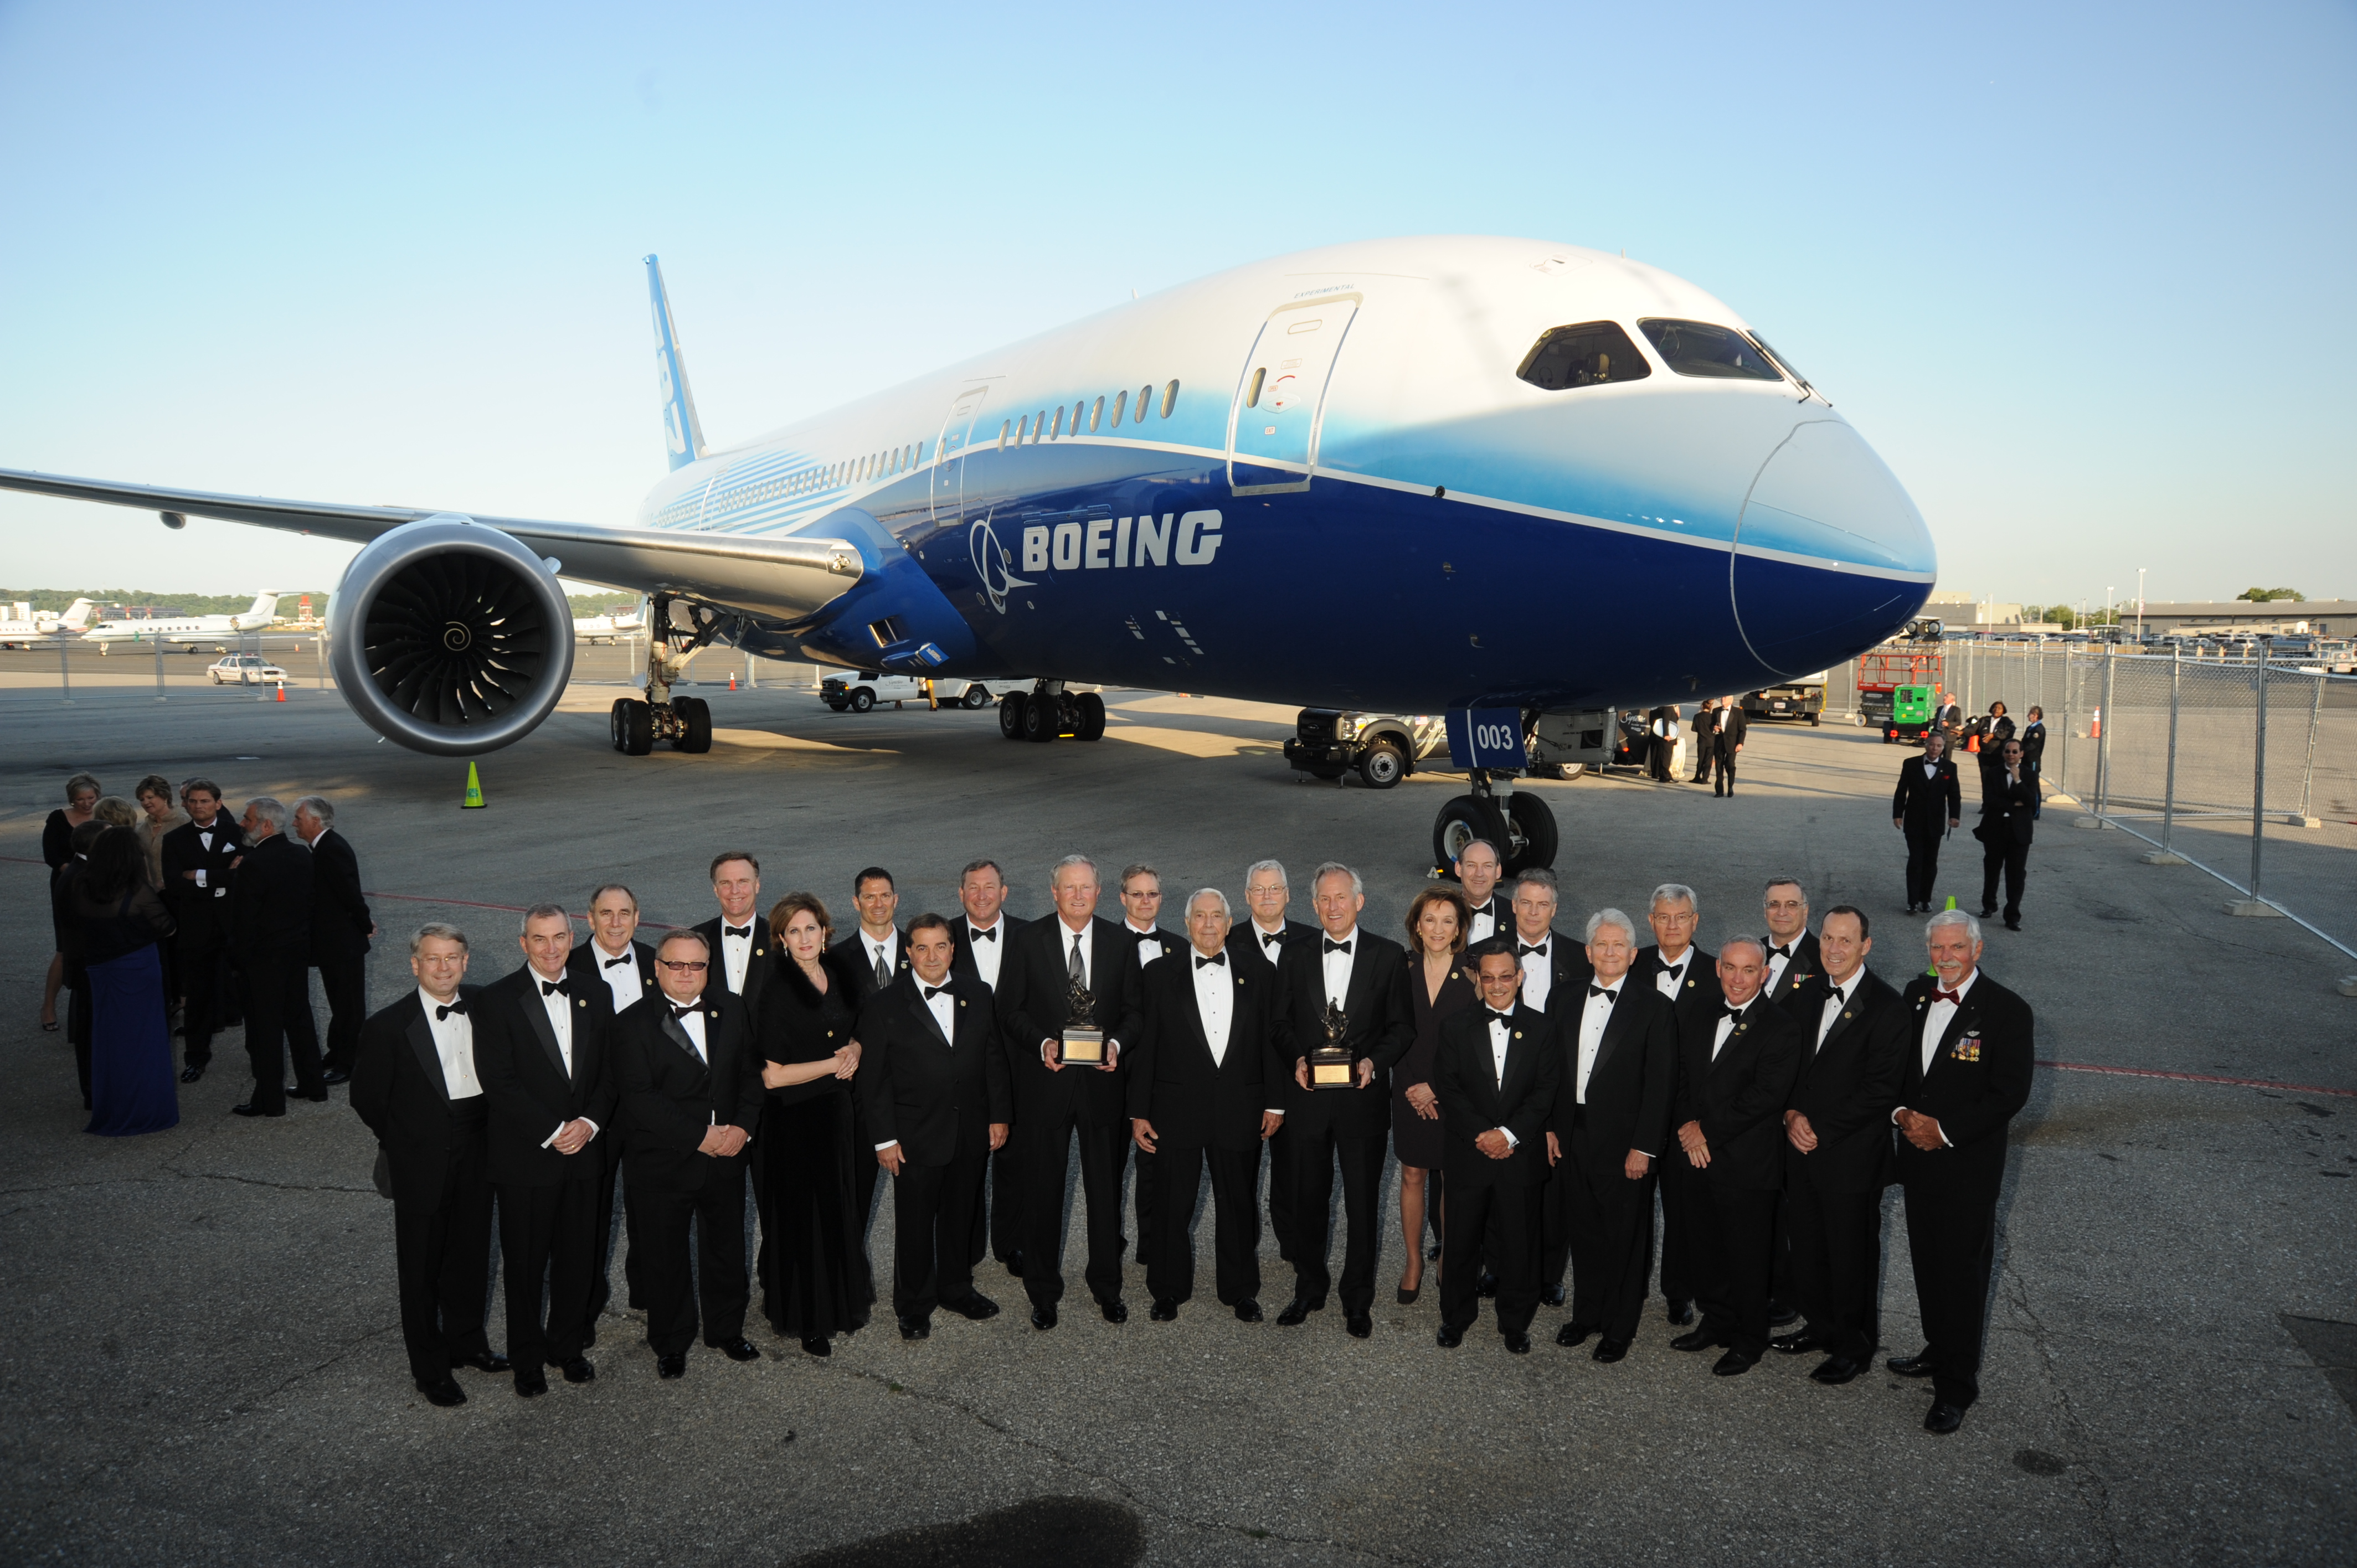 2011 Collier Trophy Recipient, the Boeing 787 Dreamliner, and Collier Selection Committee